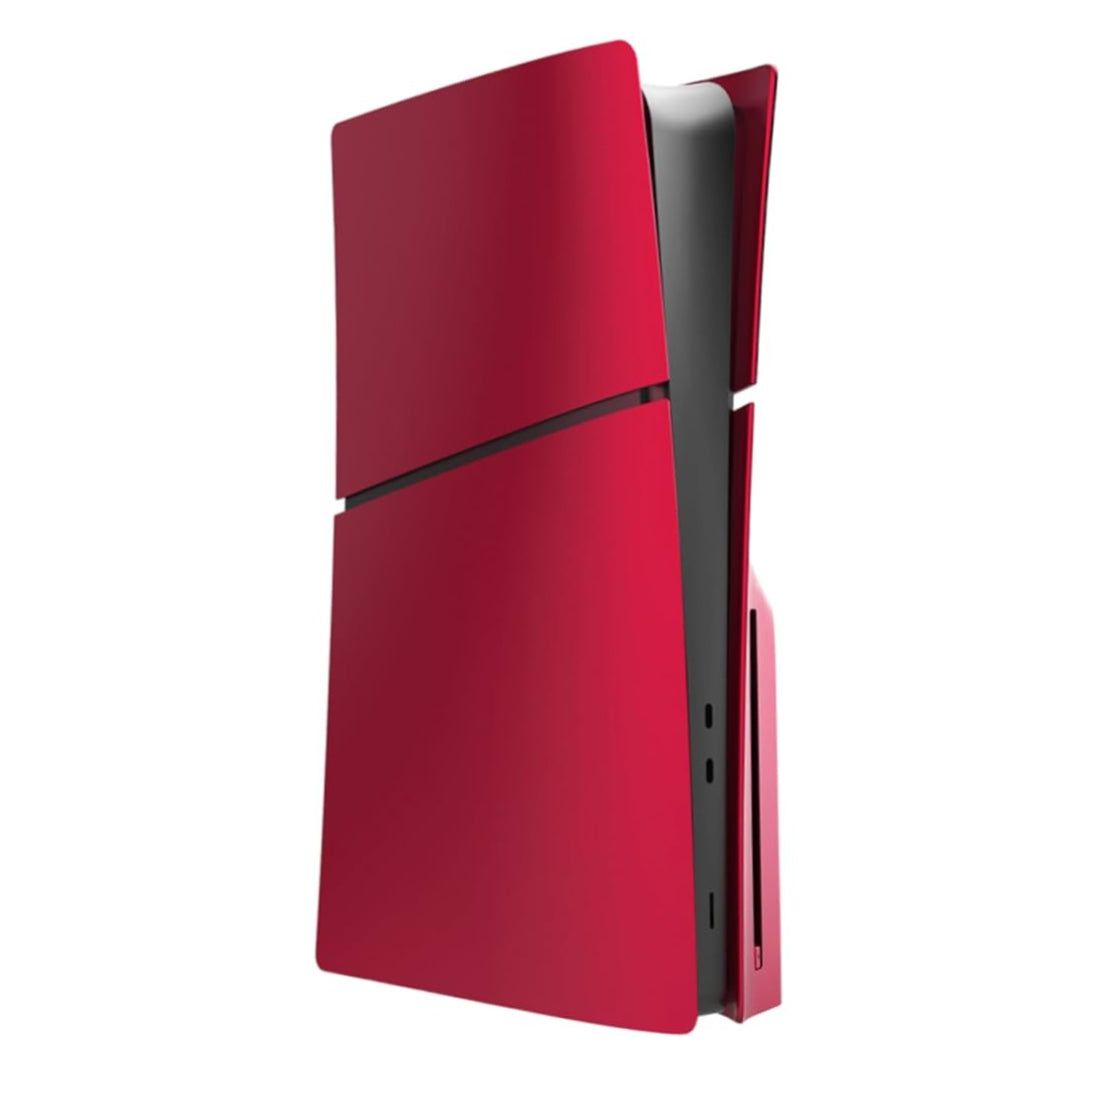 Faceplate Slim Plastic Cover For Playstation 5 - Disc Edition - Red - أكسسوار